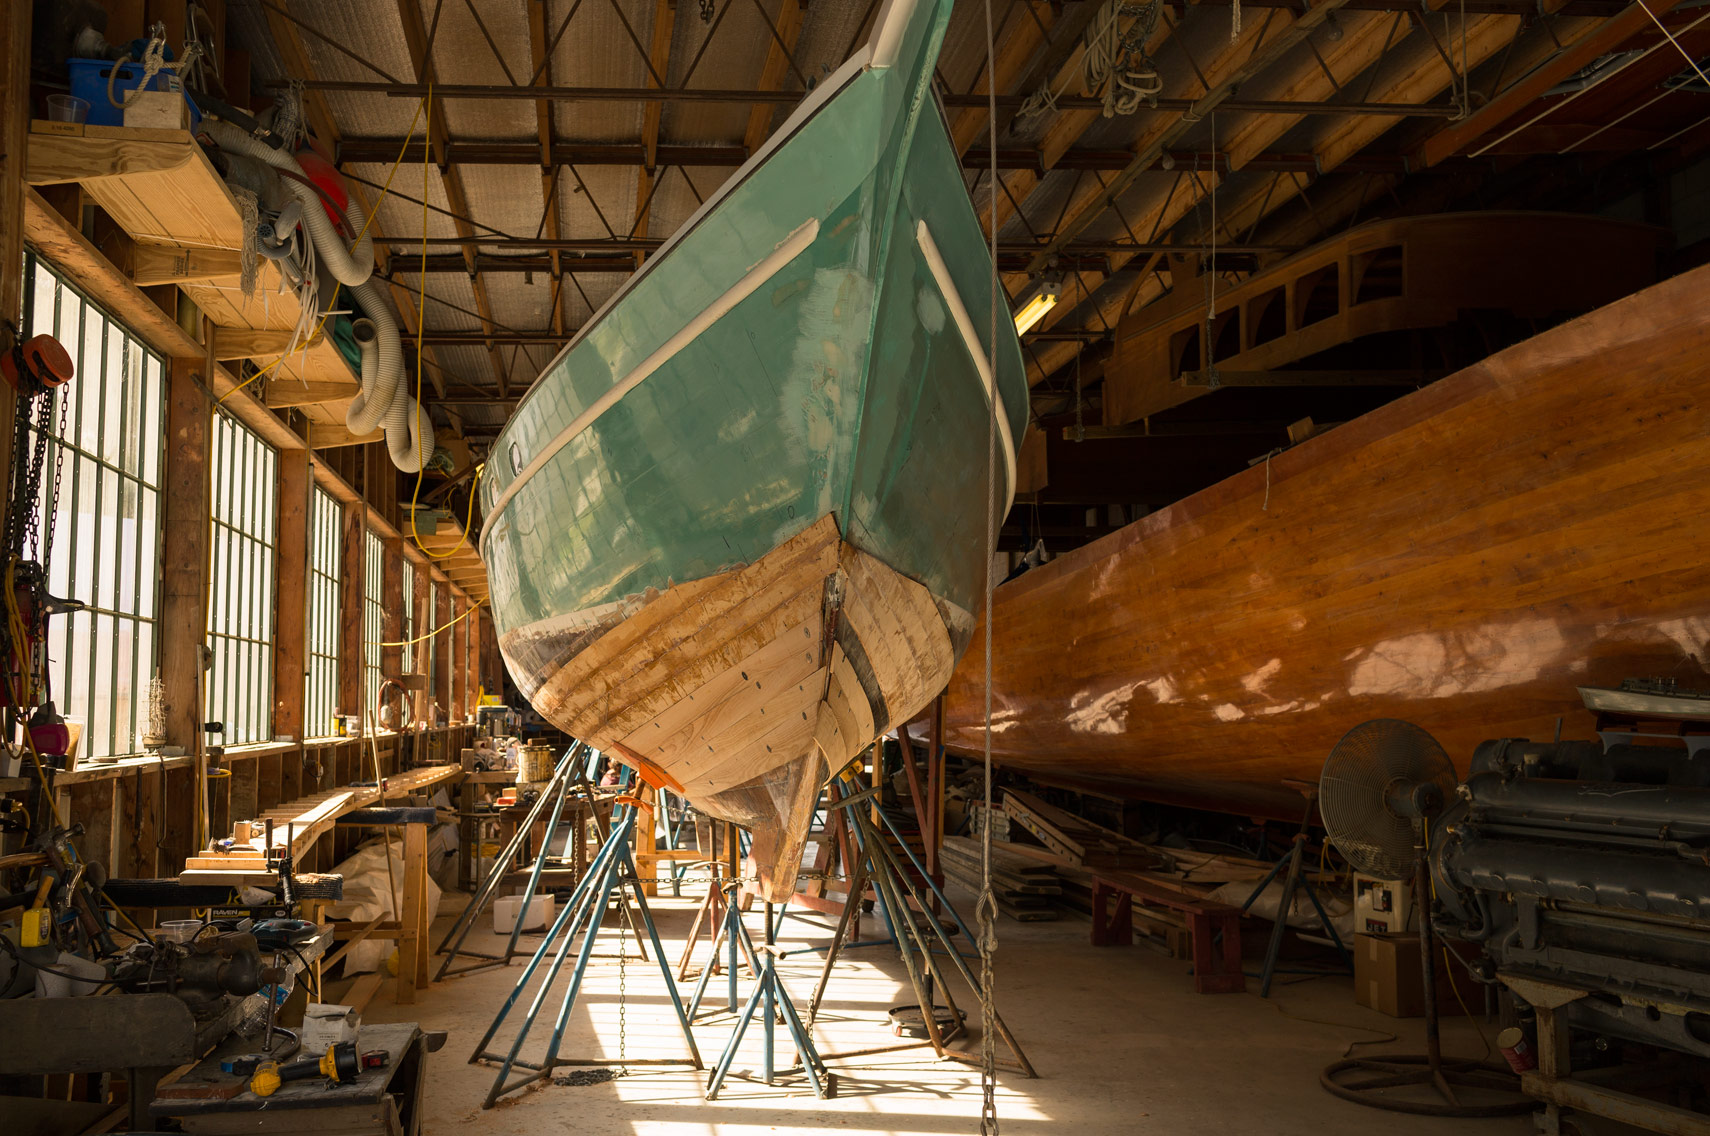 wooden boat being repaired at shipyard at washington dc industrial photography